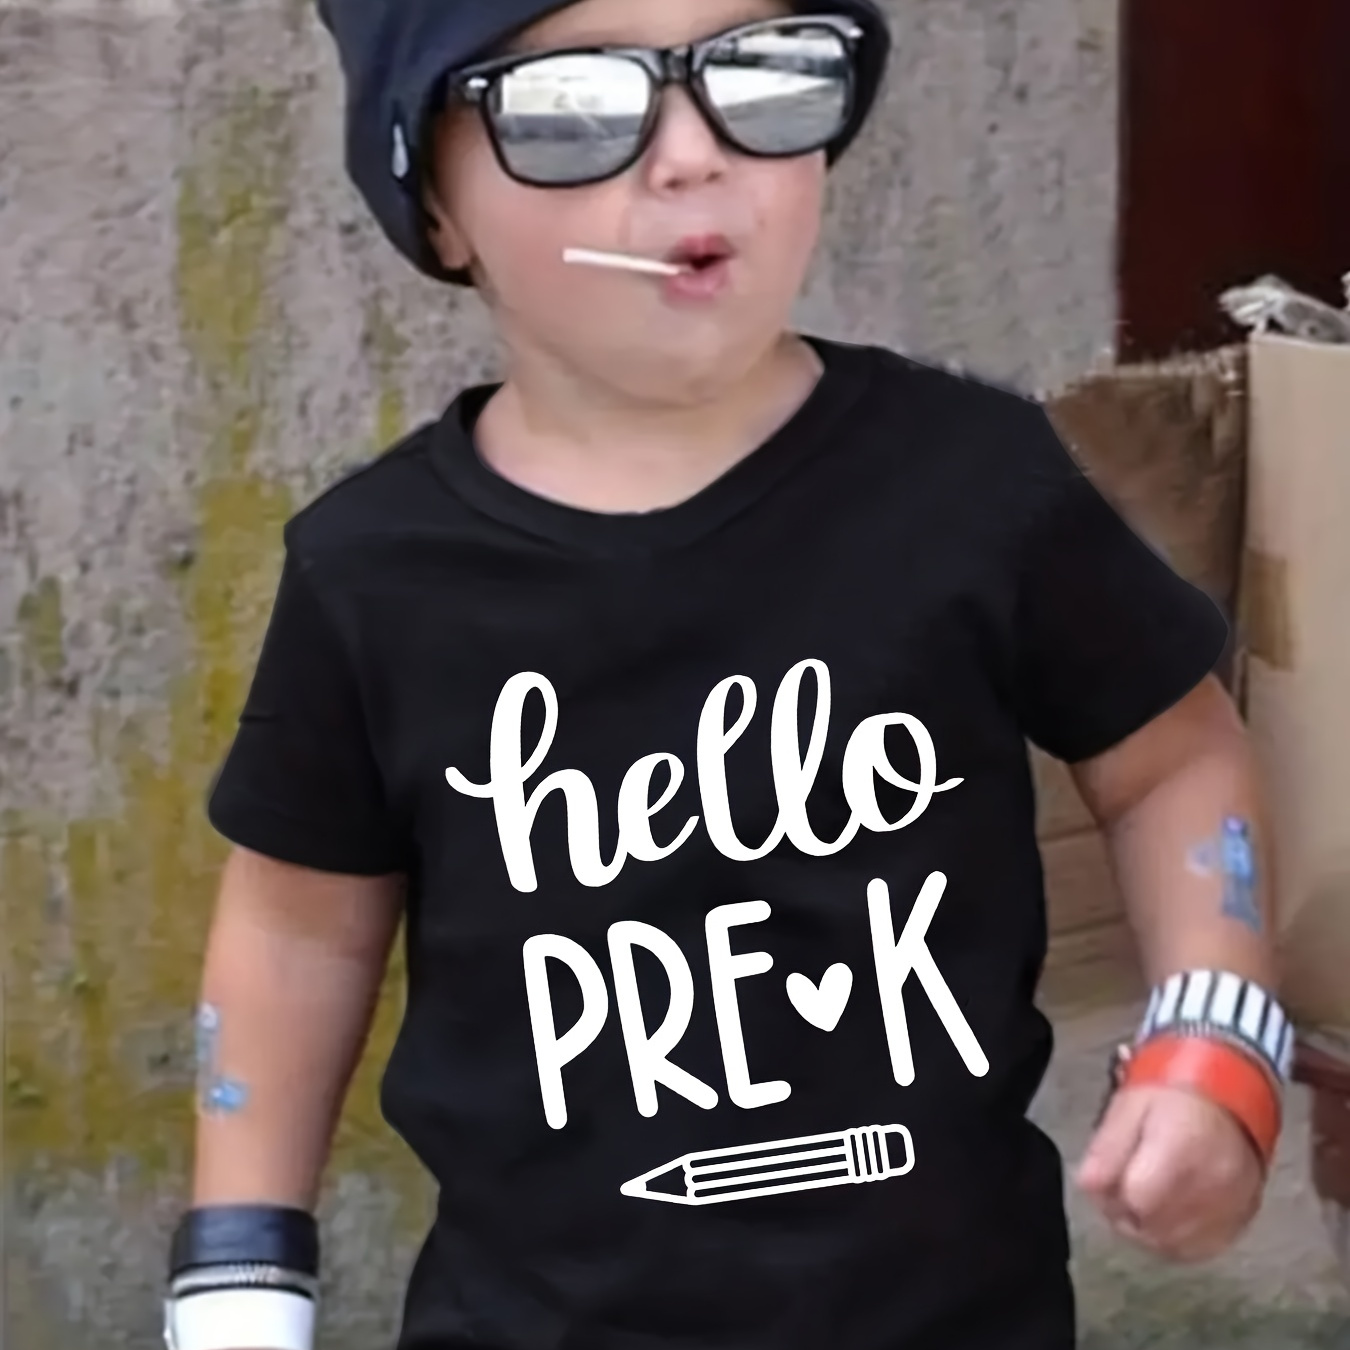 

hello Pre-k" Print T-shirt For Boys, Casual Crew Neck Short Sleeve Top, Boy's Clothing For Daily Street Wear